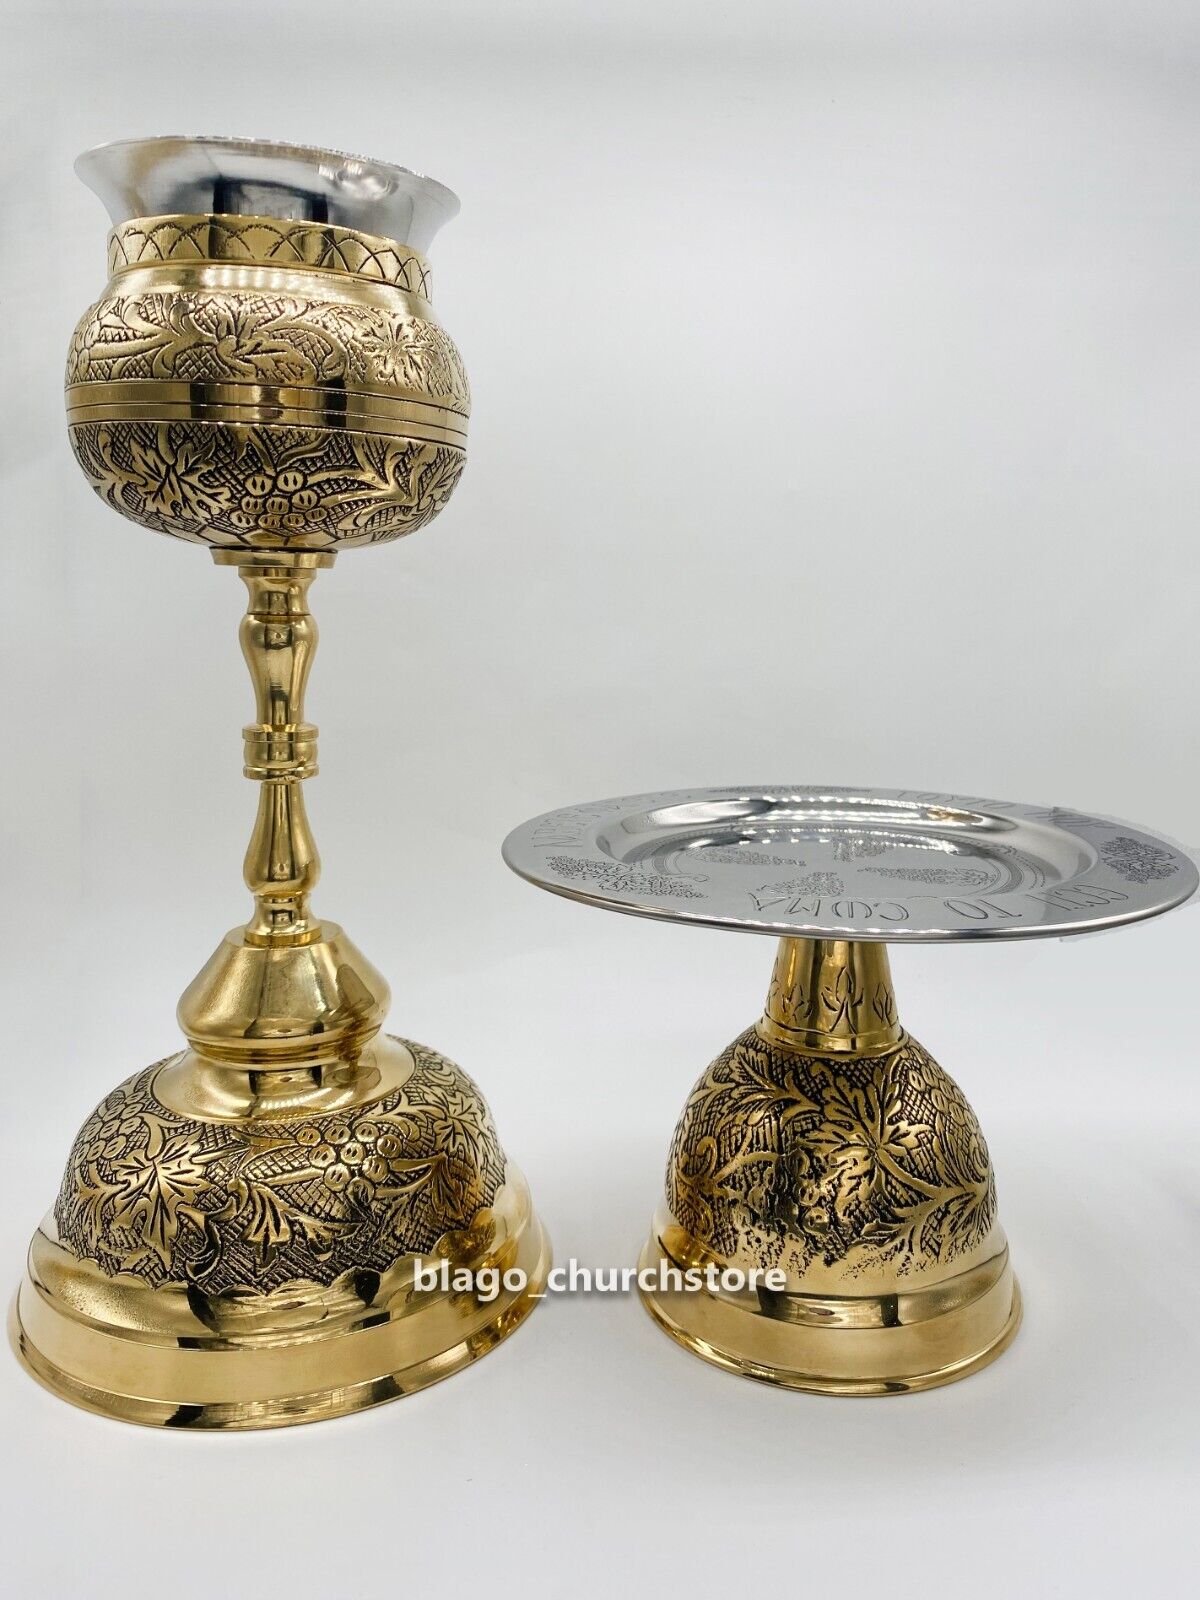 Christian New Chalice Set 0.25 l with 5 Pieces Eucharistic Set Orthodox Church